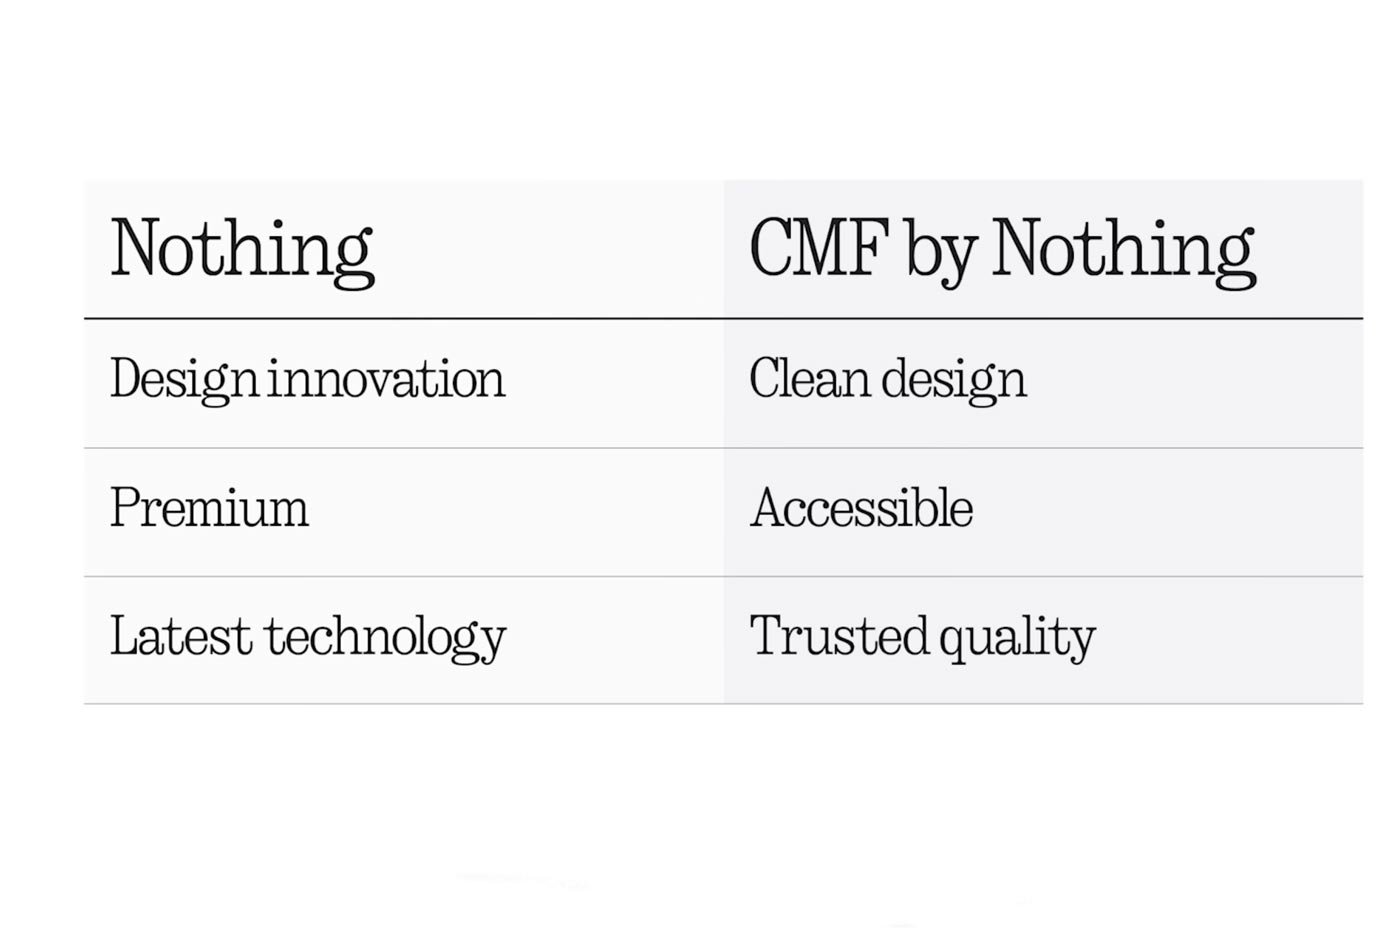 Nothing vs CMF by Nothing